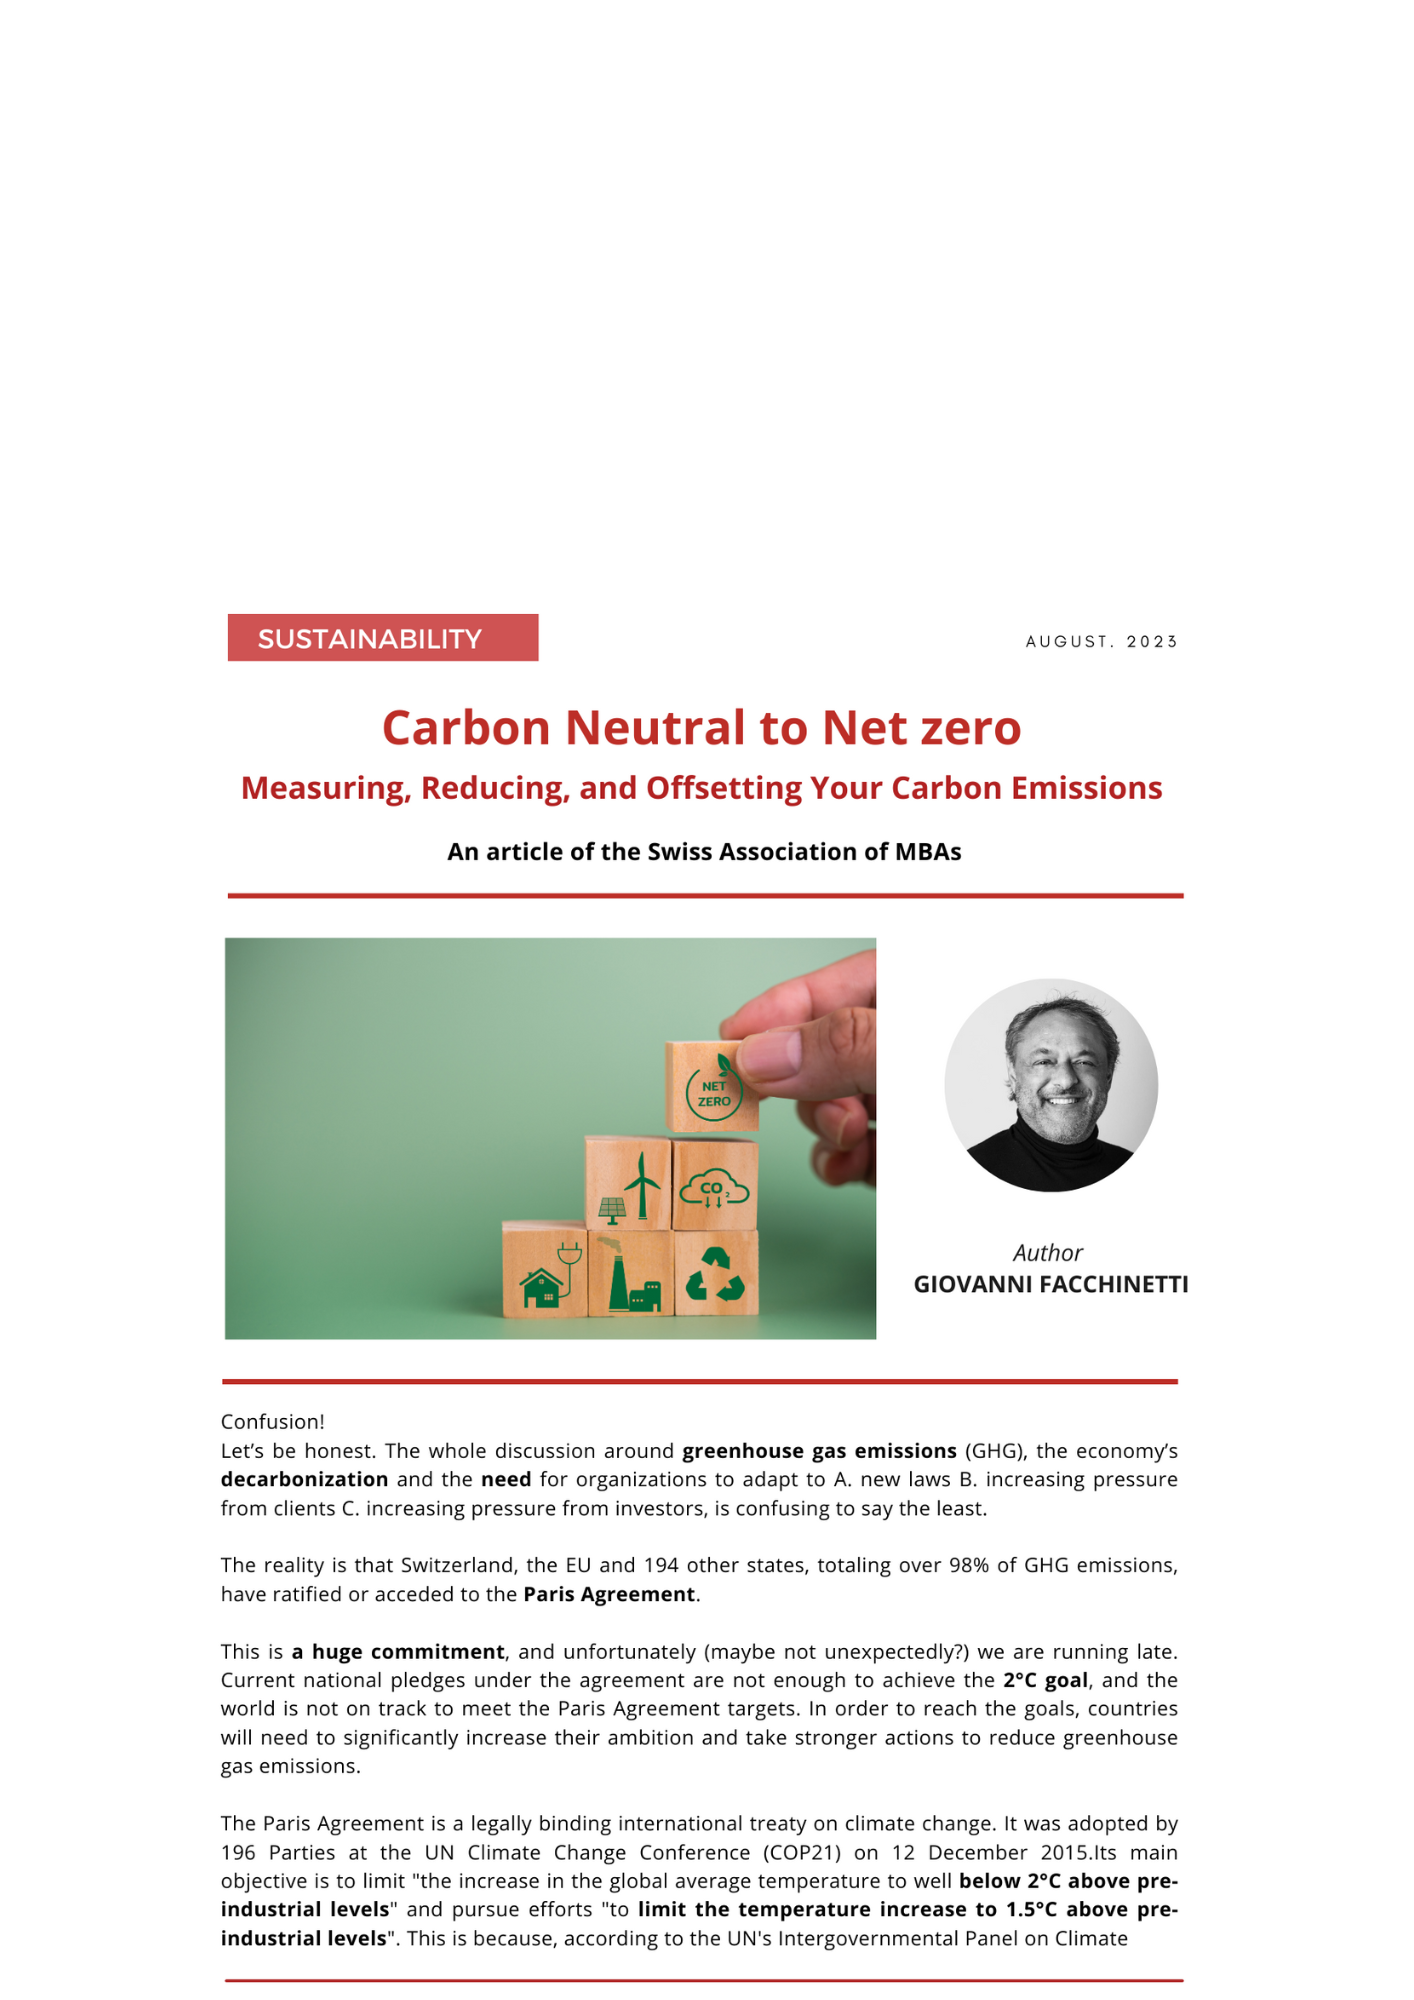 Carbon Neutral to Net zero: Measuring, Reducing, and Offsetting Your Carbon Emissions